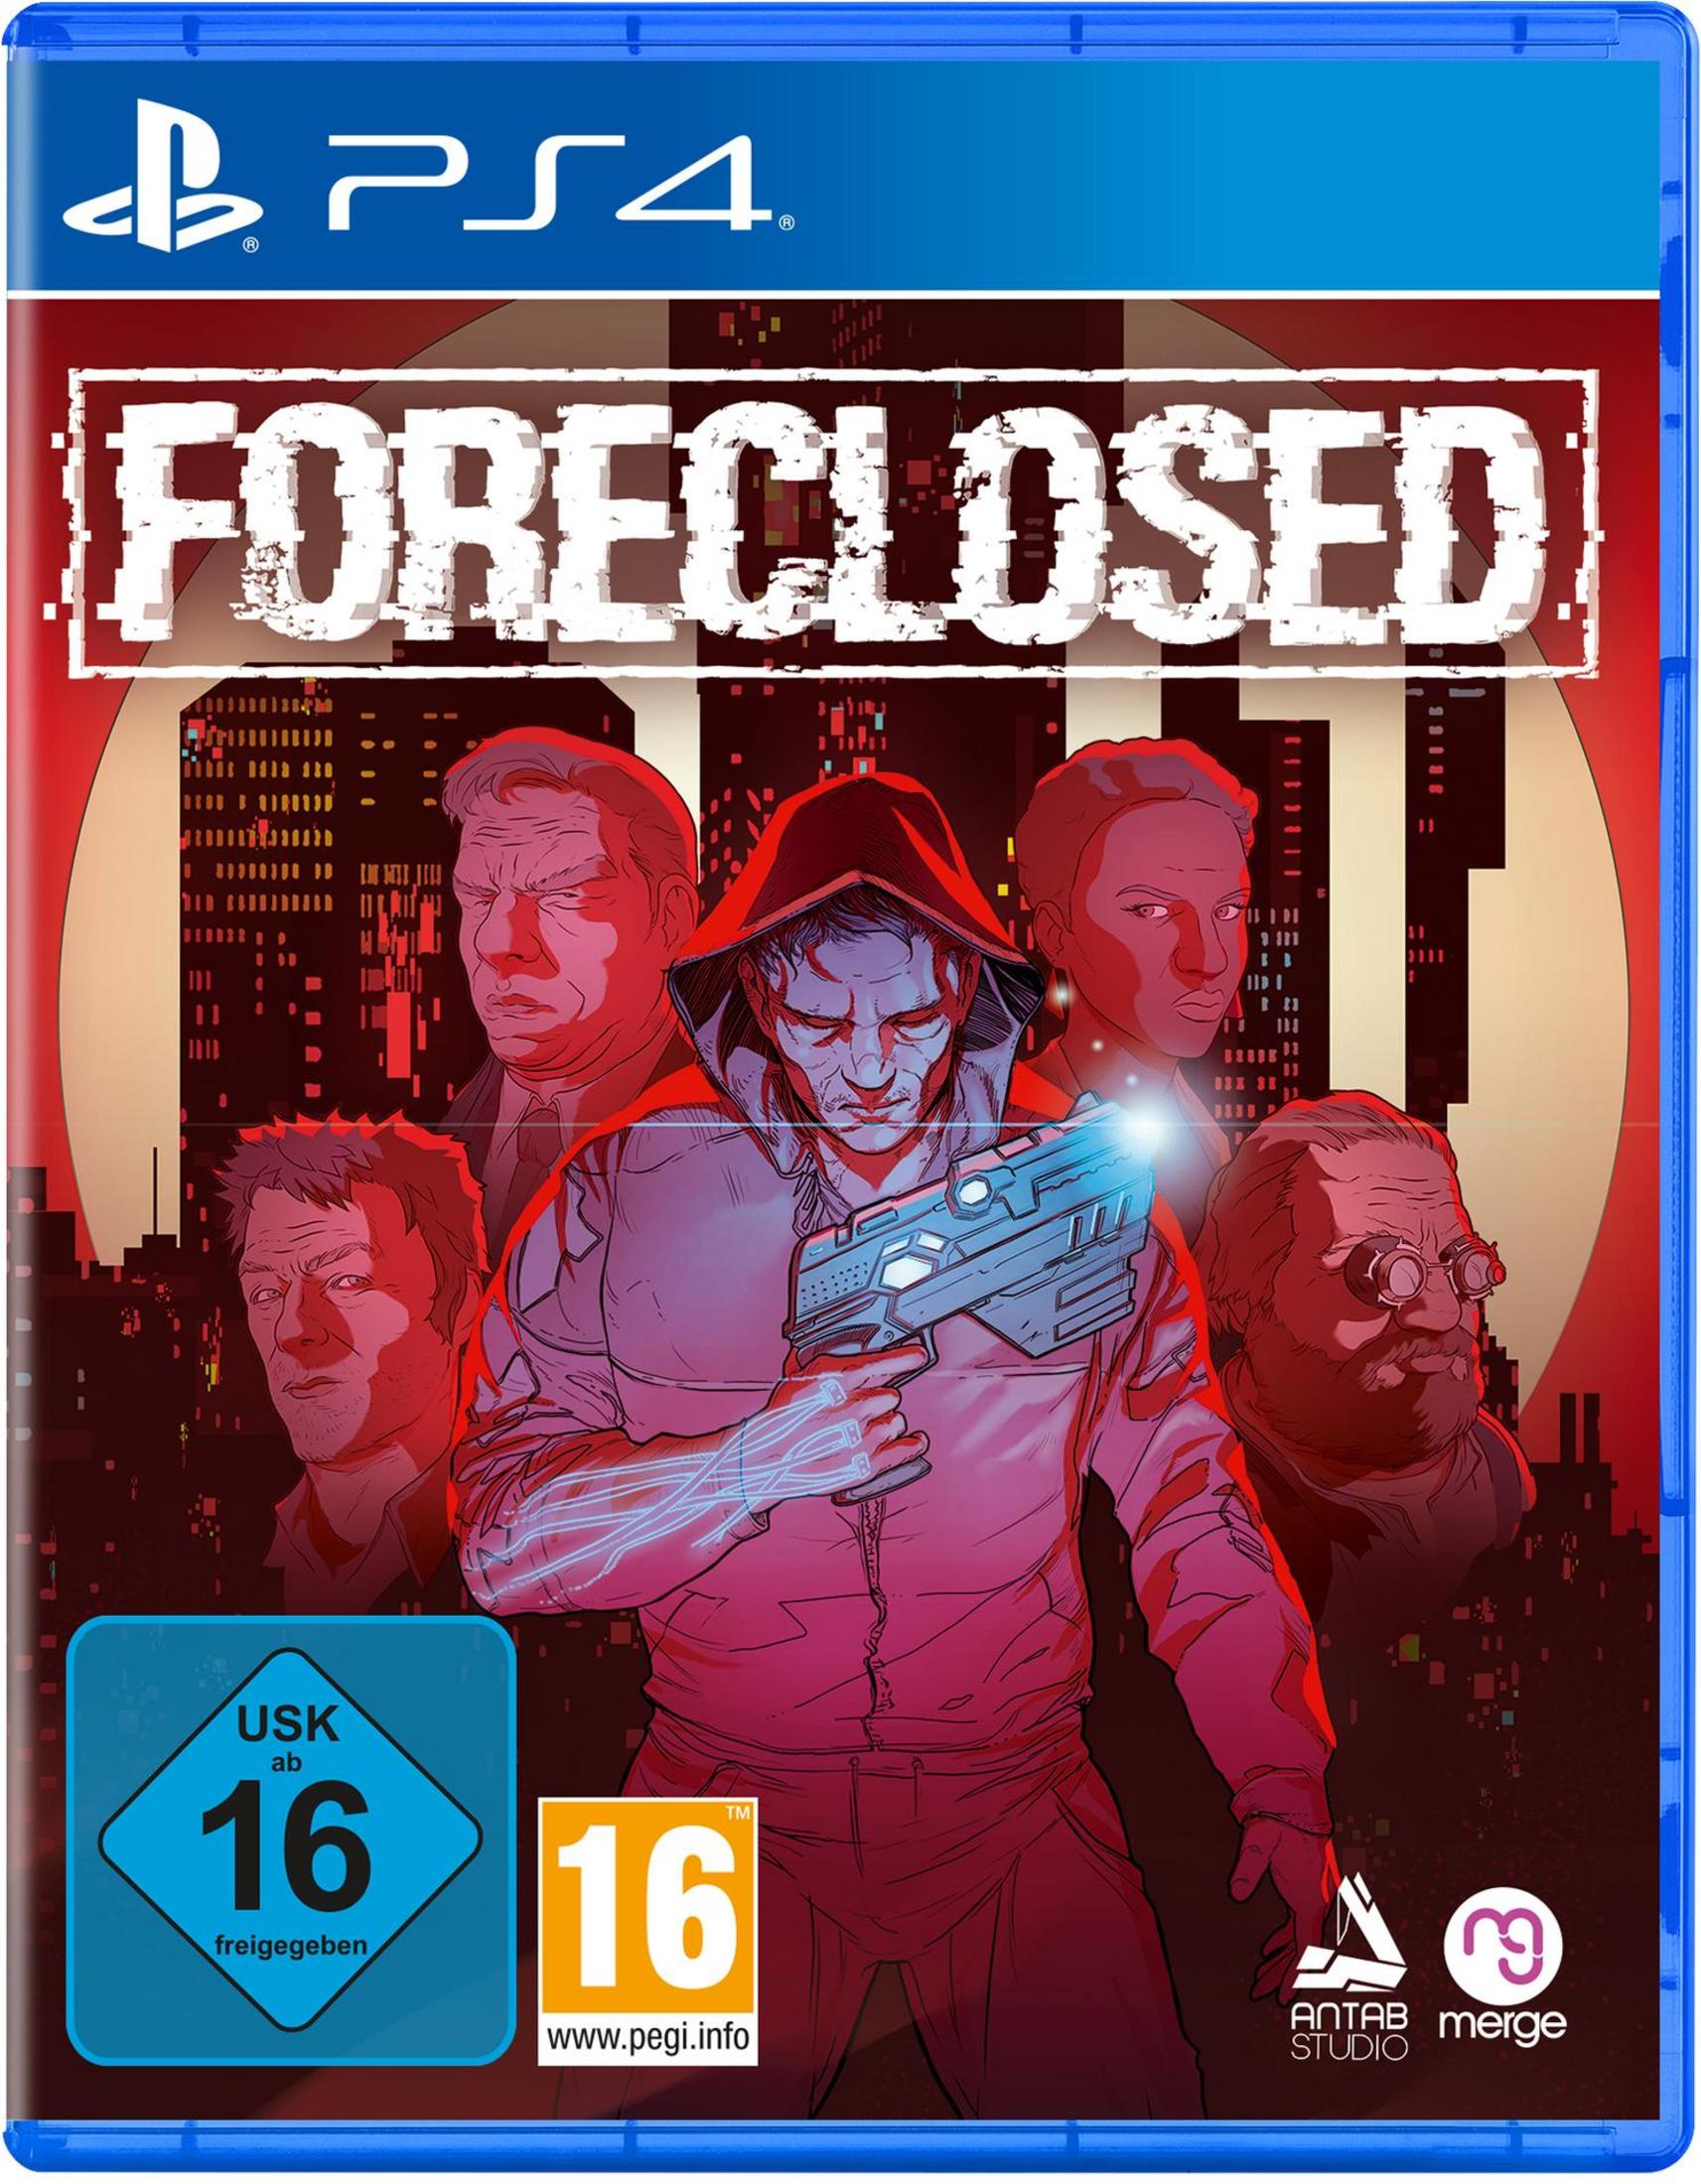 - 4] Foreclosed [PlayStation PS-4